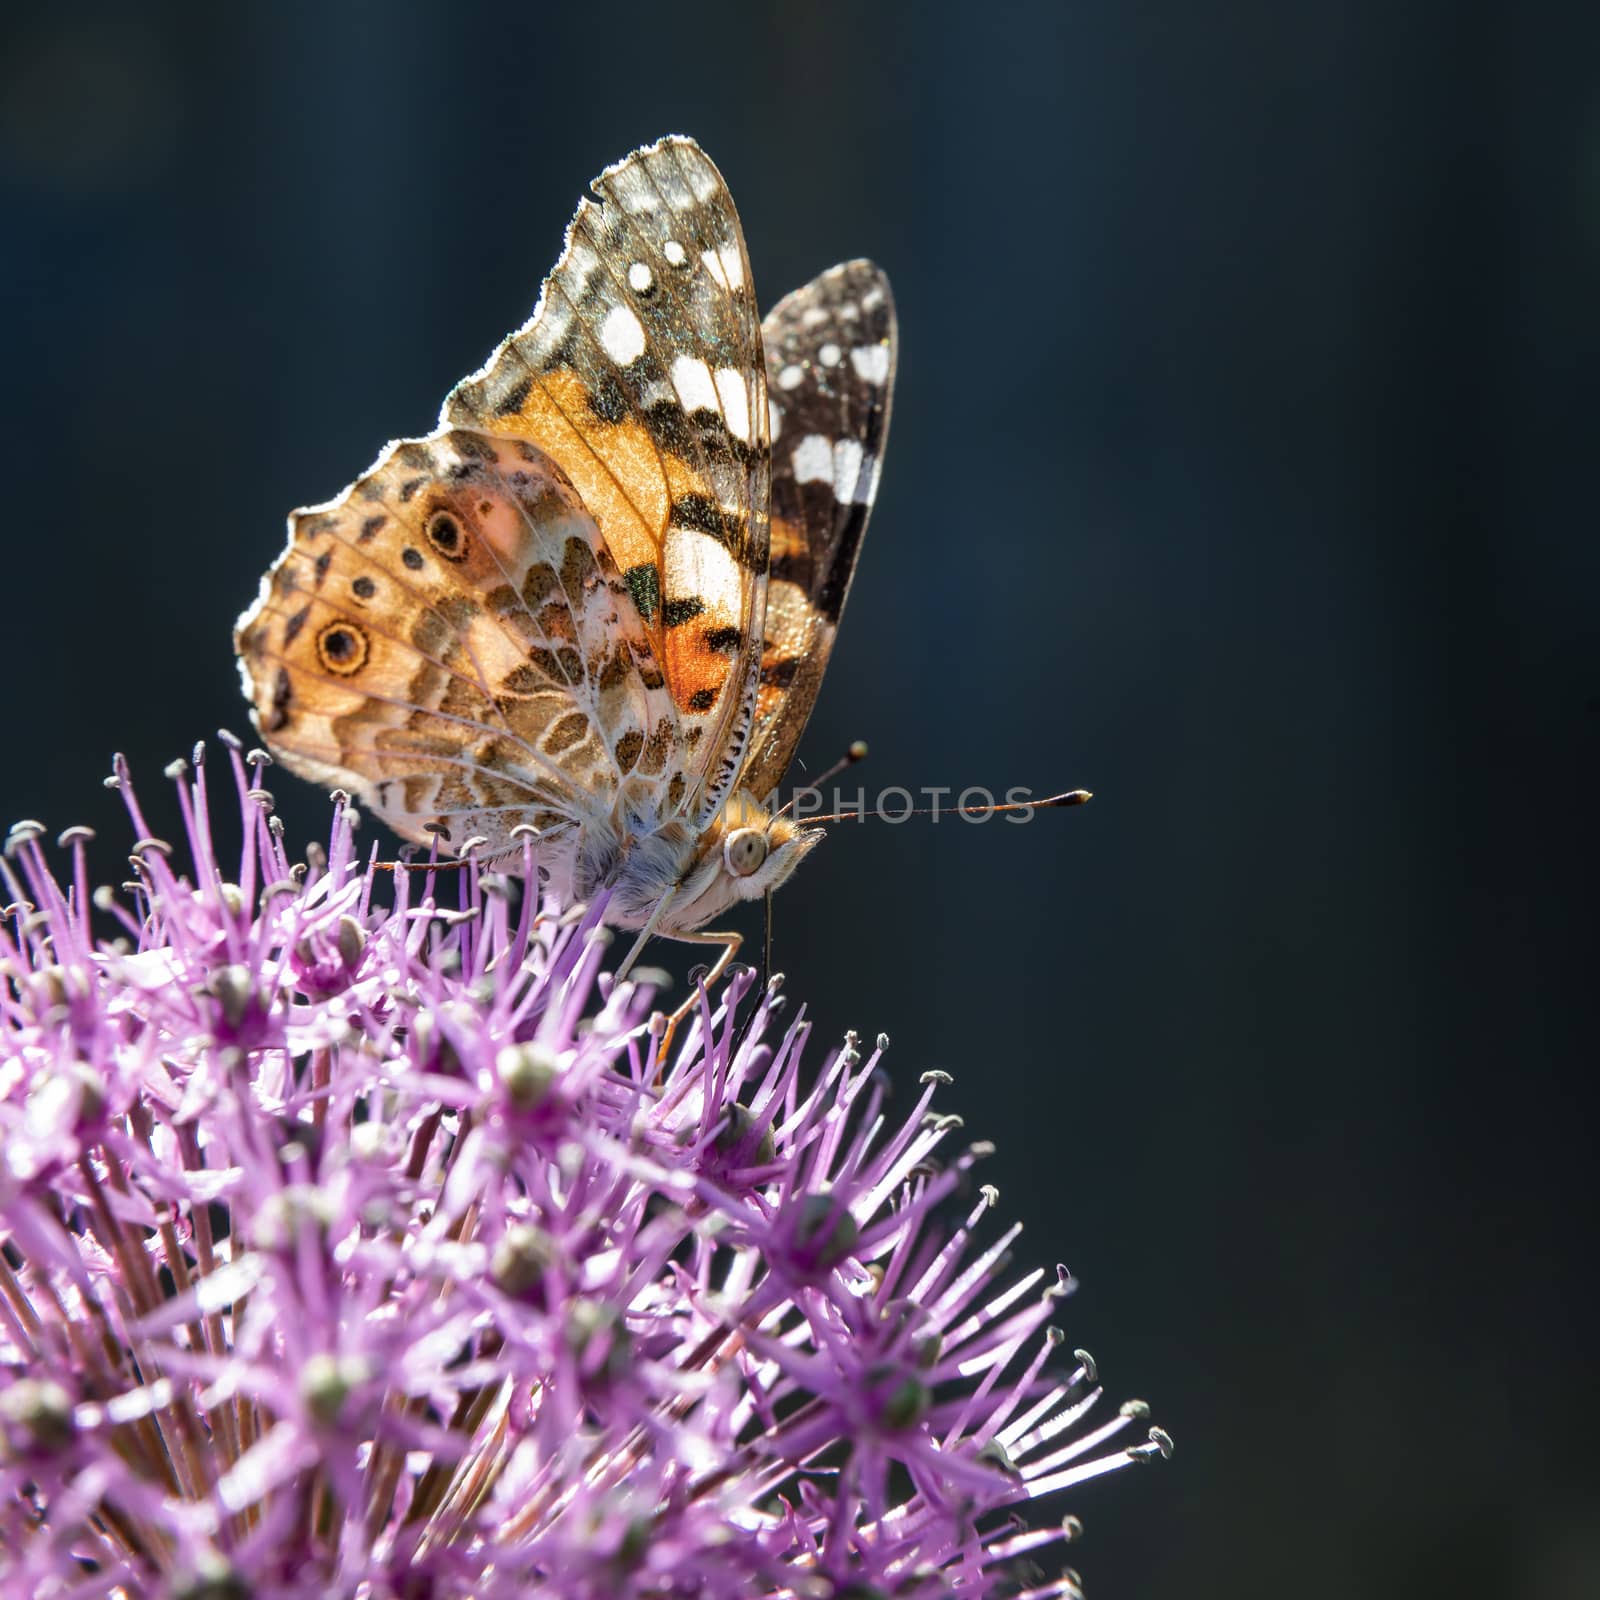 The beautiful butterfly collects nectar from a flower of a decorative bulb.